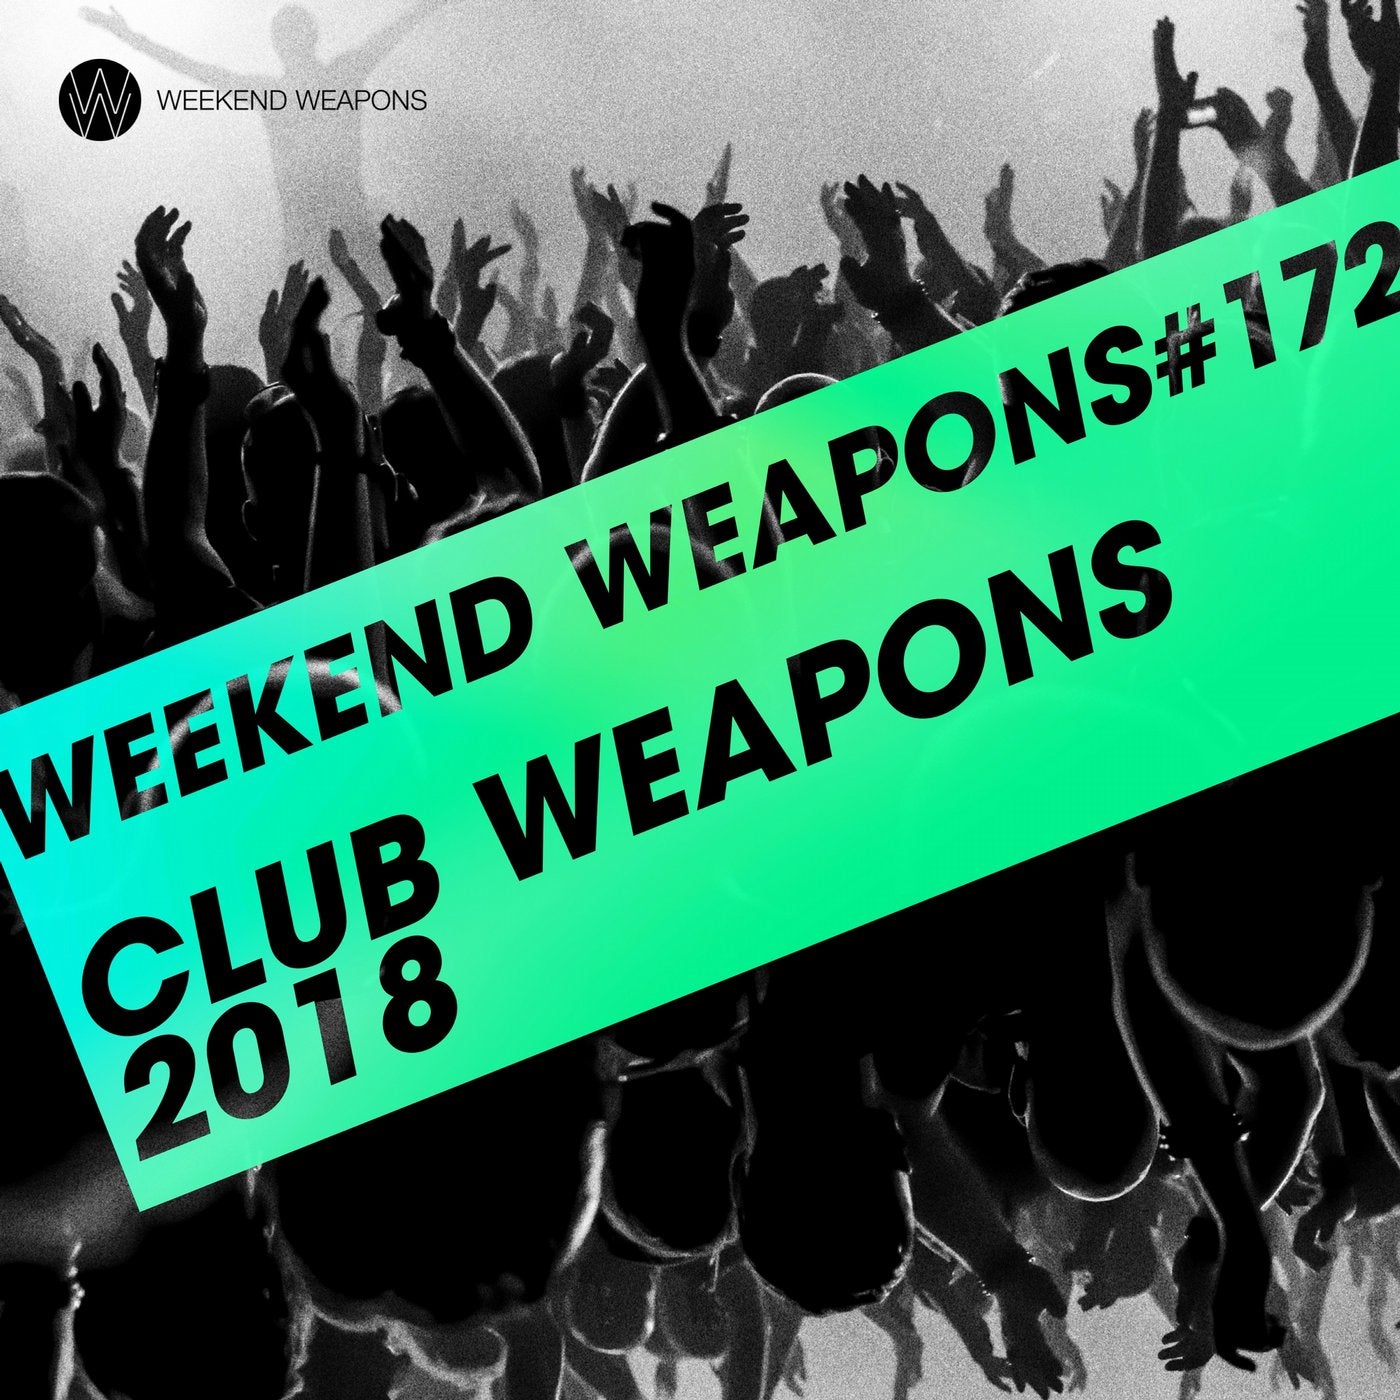 Club Weapons 2018